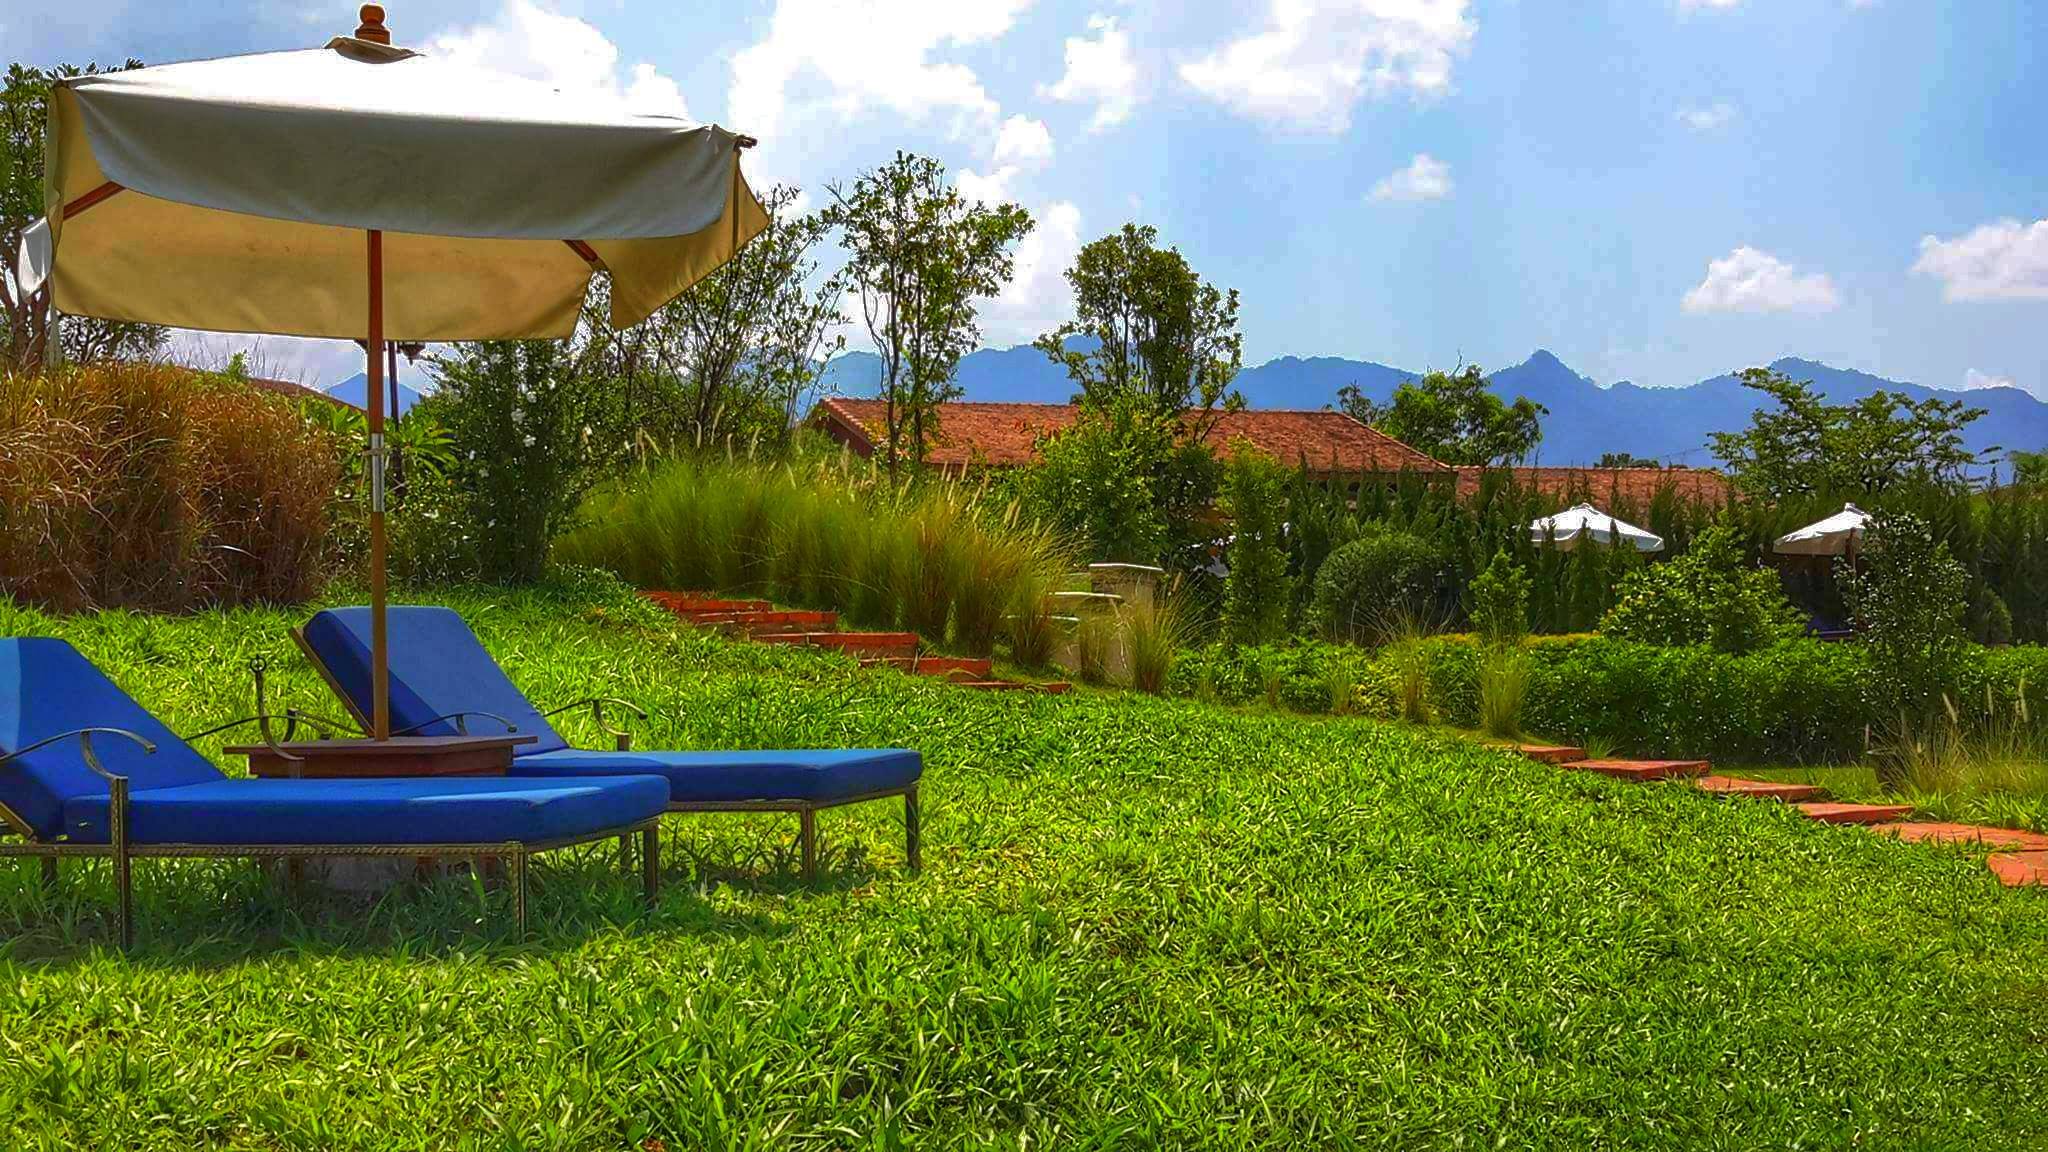 Reverie Siam Resort - Best place to stay in Pai, Thailand